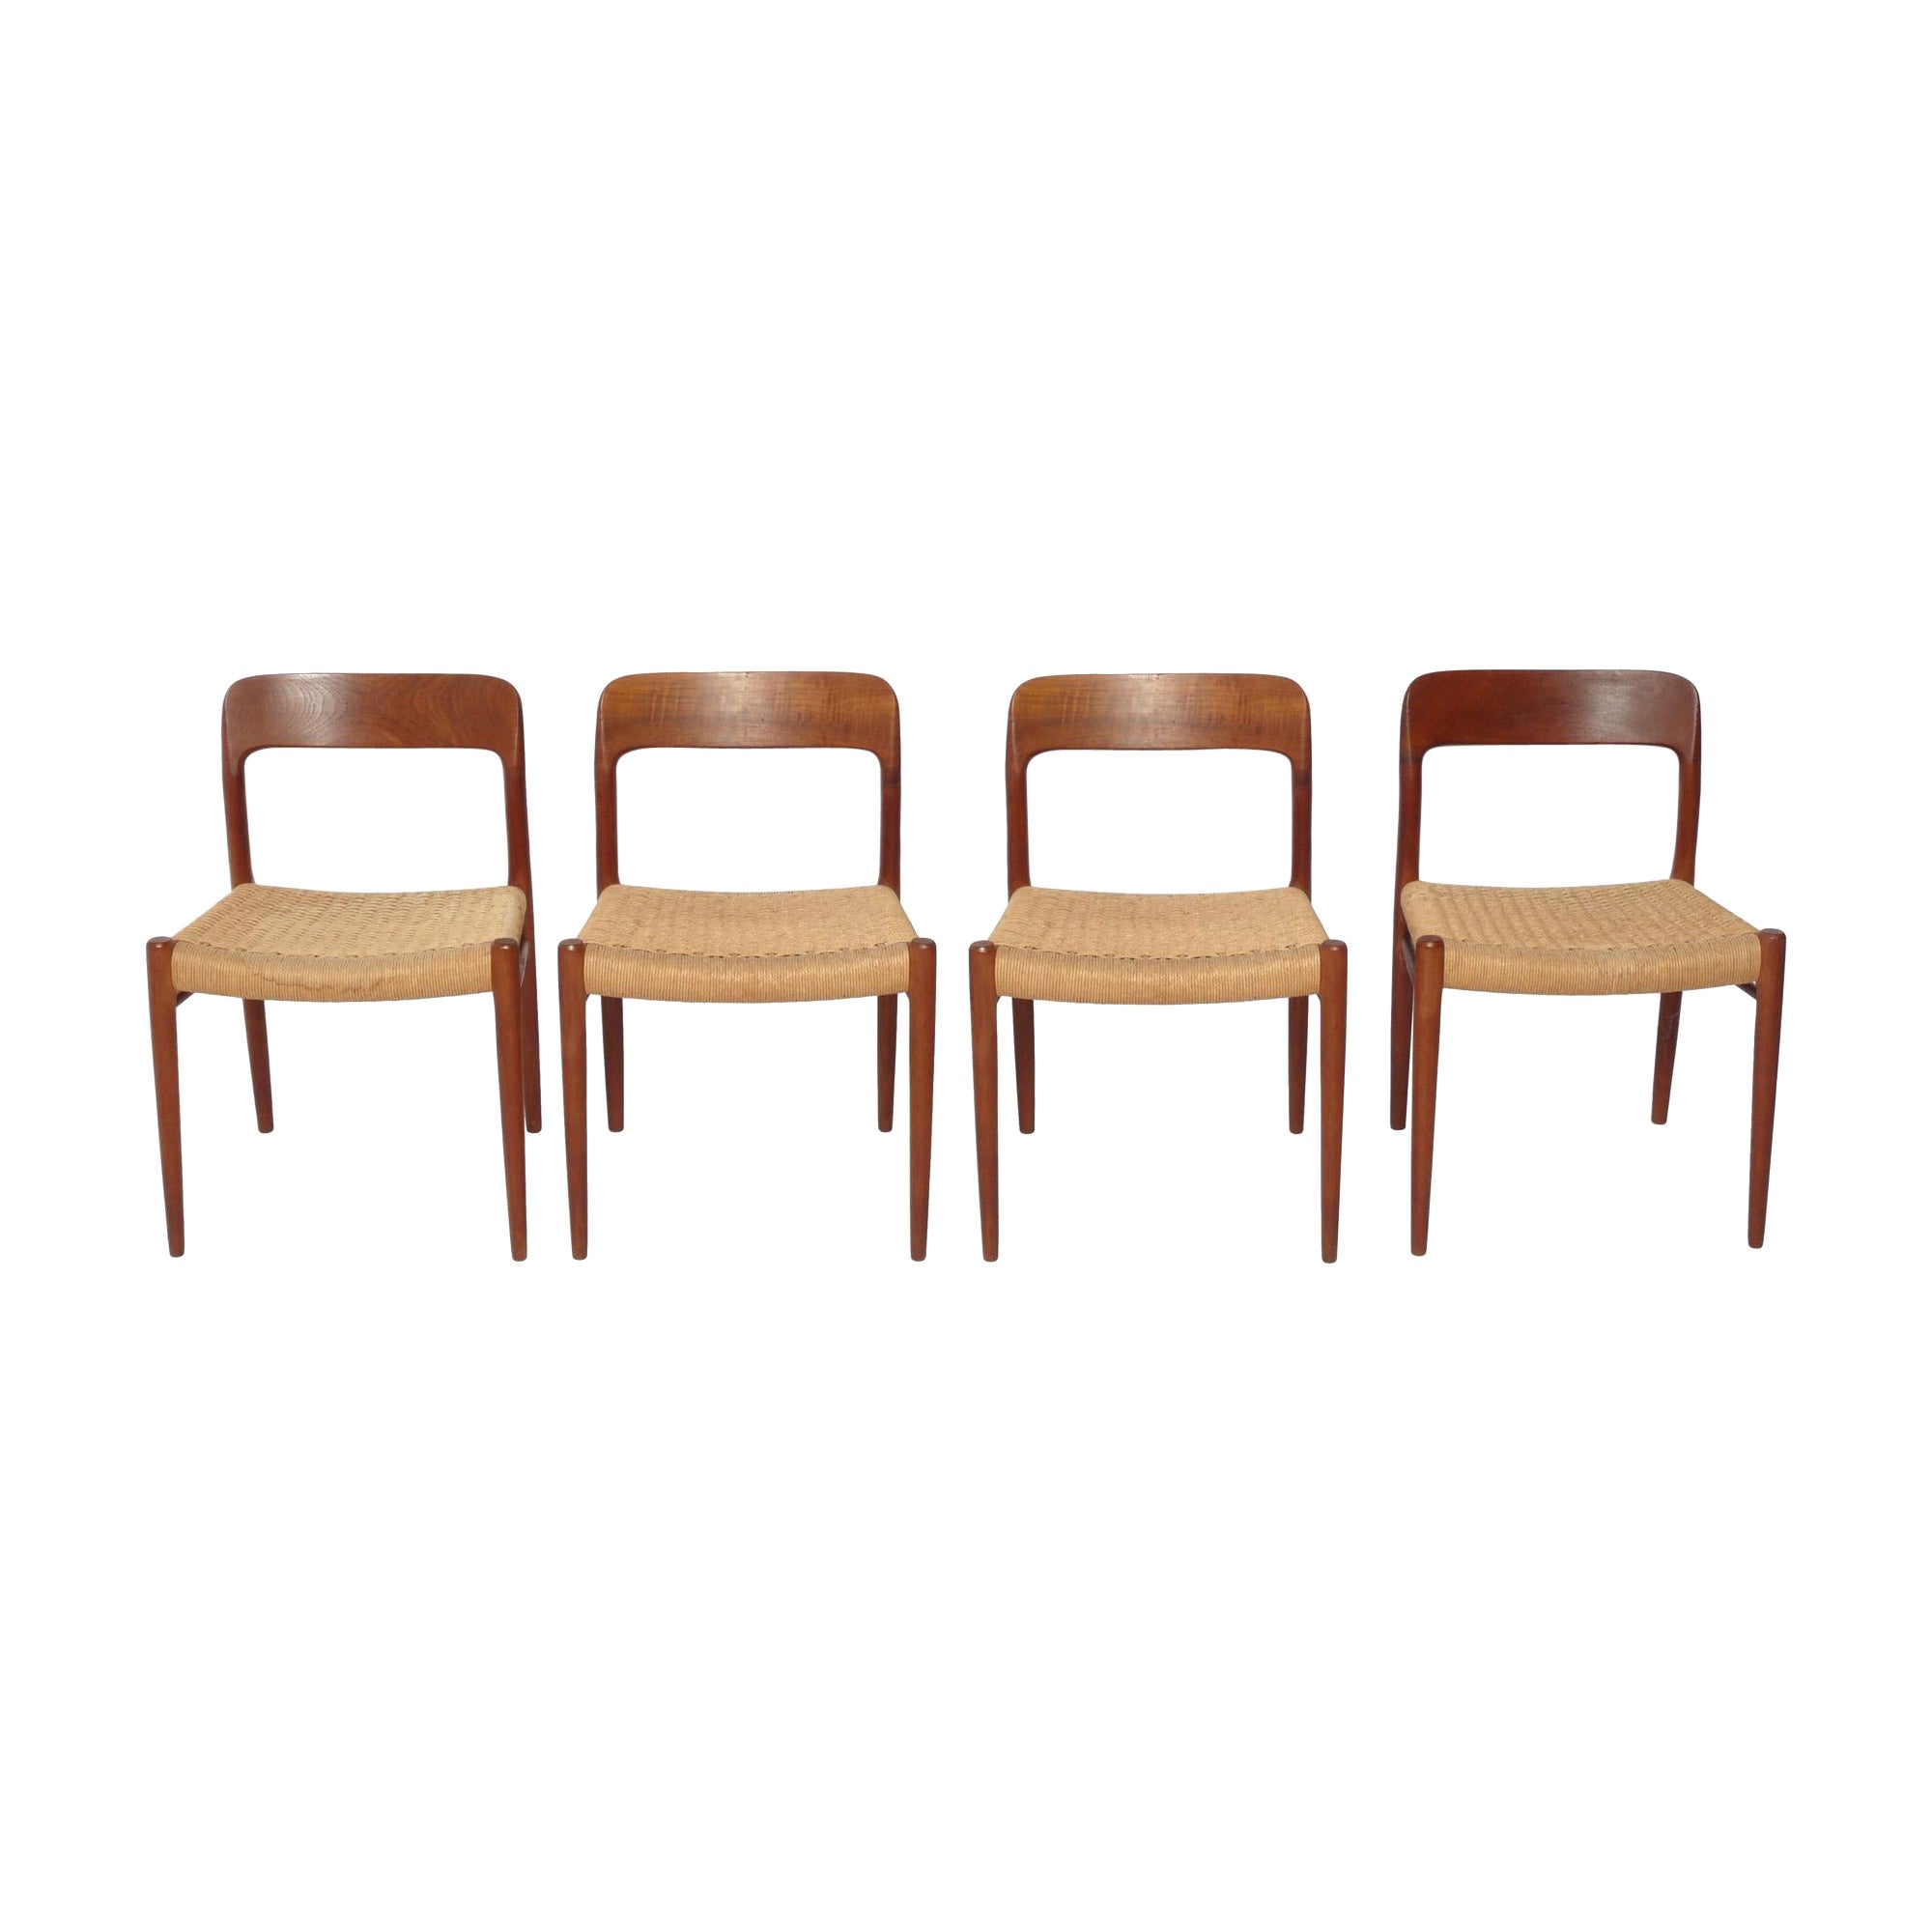 Niels Moller Danish Modern Dining Chairs